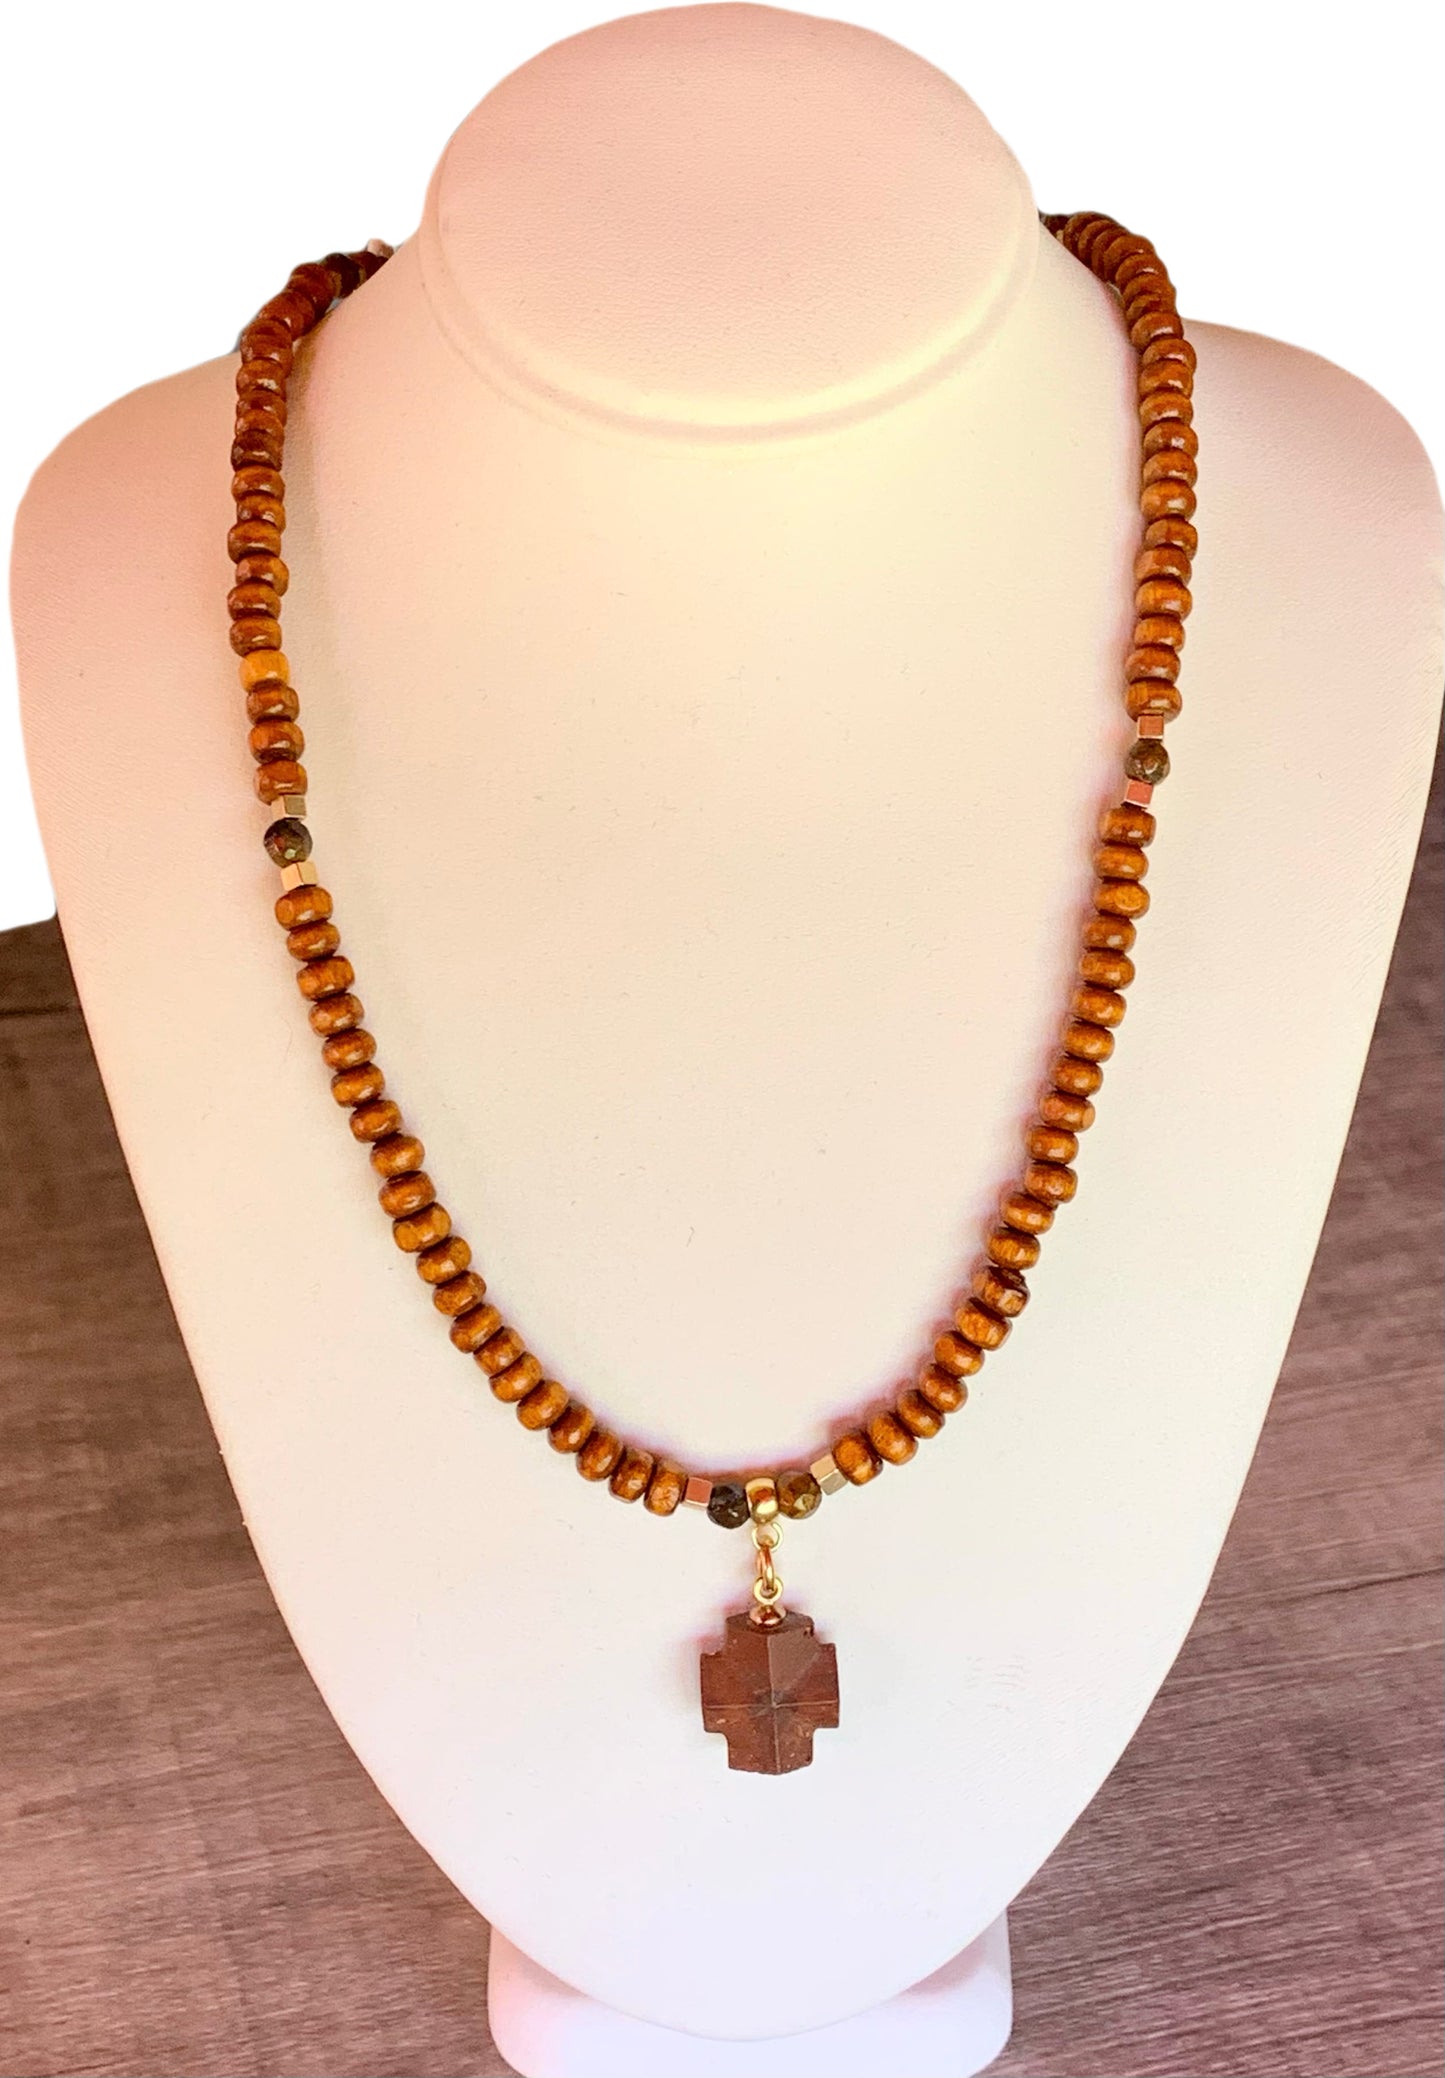 Christof Handmade Wood, Tigers Eye, and Hematite 24" Necklace With A Vintage Greek Square Cross